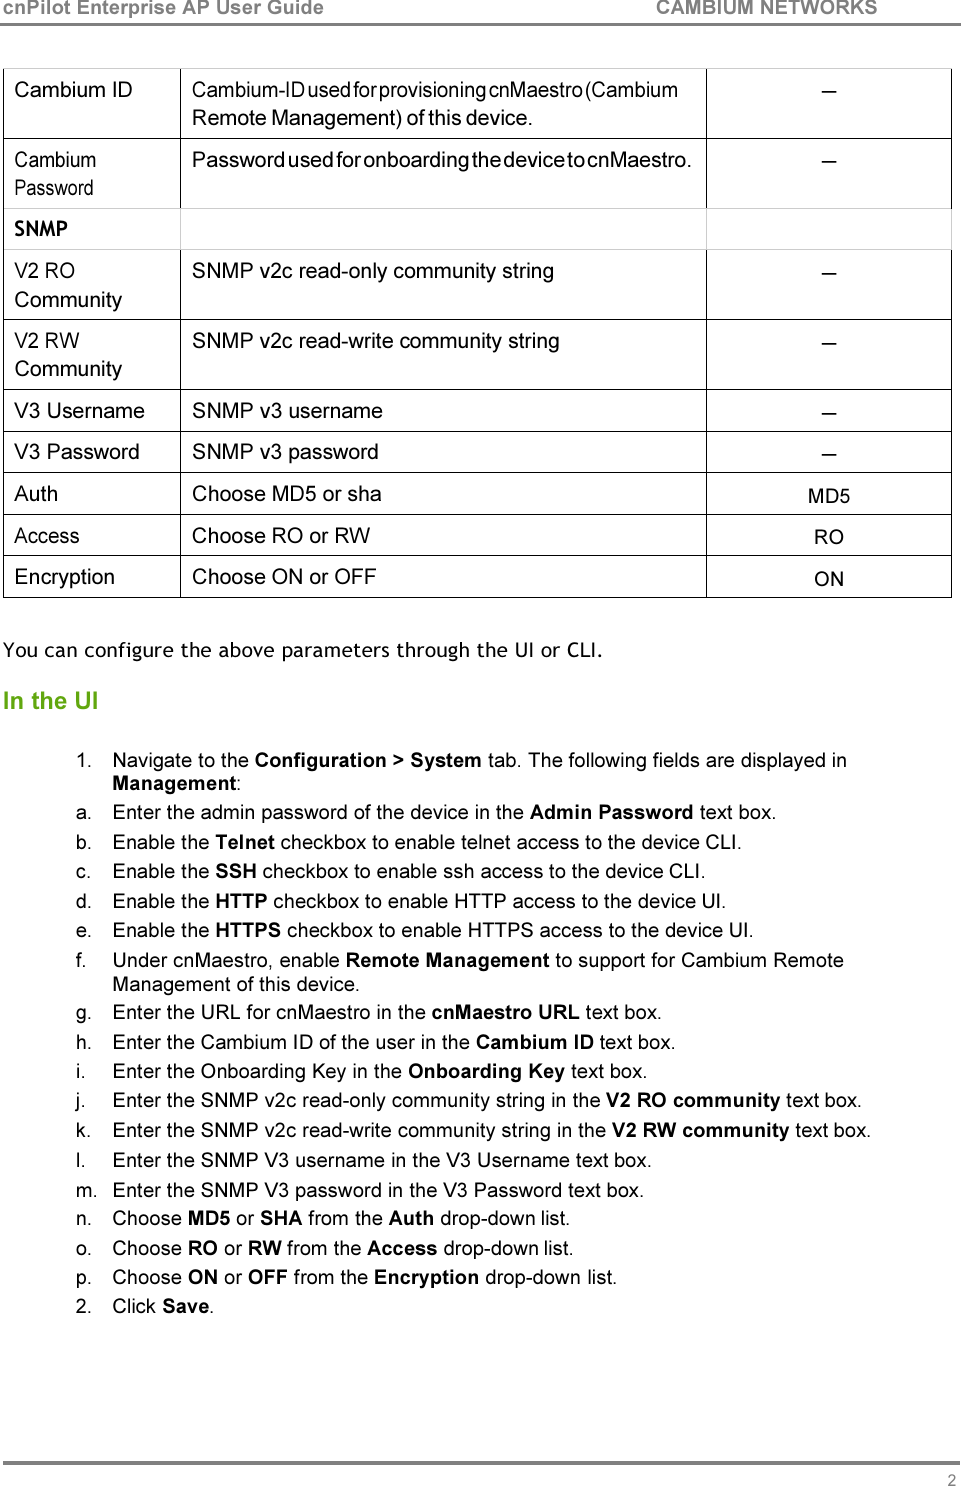 20 cnPilot Enterprise AP User Guide CAMBIUM NETWORKS     Cambium ID Cambium-ID used for provisioning cnMaestro (Cambium Remote Management) of this device. ─ Cambium Password Password used for onboarding the device to cnMaestro. ─ SNMP     V2 RO Community SNMP v2c read-only community string ─ V2 RW Community SNMP v2c read-write community string ─ V3 Username  SNMP v3 username ─ V3 Password  SNMP v3 password ─ Auth  Choose MD5 or sha  MD5 Access  Choose RO or RW  RO Encryption  Choose ON or OFF  ON  You can configure the above parameters through the UI or CLI.  In the UI  1. Navigate to the Configuration &gt; System tab. The following fields are displayed in Management: a. Enter the admin password of the device in the Admin Password text box. b. Enable the Telnet checkbox to enable telnet access to the device CLI. c. Enable the SSH checkbox to enable ssh access to the device CLI. d. Enable the HTTP checkbox to enable HTTP access to the device UI. e. Enable the HTTPS checkbox to enable HTTPS access to the device UI. f. Under cnMaestro, enable Remote Management to support for Cambium Remote Management of this device. g. Enter the URL for cnMaestro in the cnMaestro URL text box. h. Enter the Cambium ID of the user in the Cambium ID text box. i. Enter the Onboarding Key in the Onboarding Key text box. j. Enter the SNMP v2c read-only community string in the V2 RO community text box. k. Enter the SNMP v2c read-write community string in the V2 RW community text box. l. Enter the SNMP V3 username in the V3 Username text box. m. Enter the SNMP V3 password in the V3 Password text box. n. Choose MD5 or SHA from the Auth drop-down list. o. Choose RO or RW from the Access drop-down list. p. Choose ON or OFF from the Encryption drop-down list. 2. Click Save. 